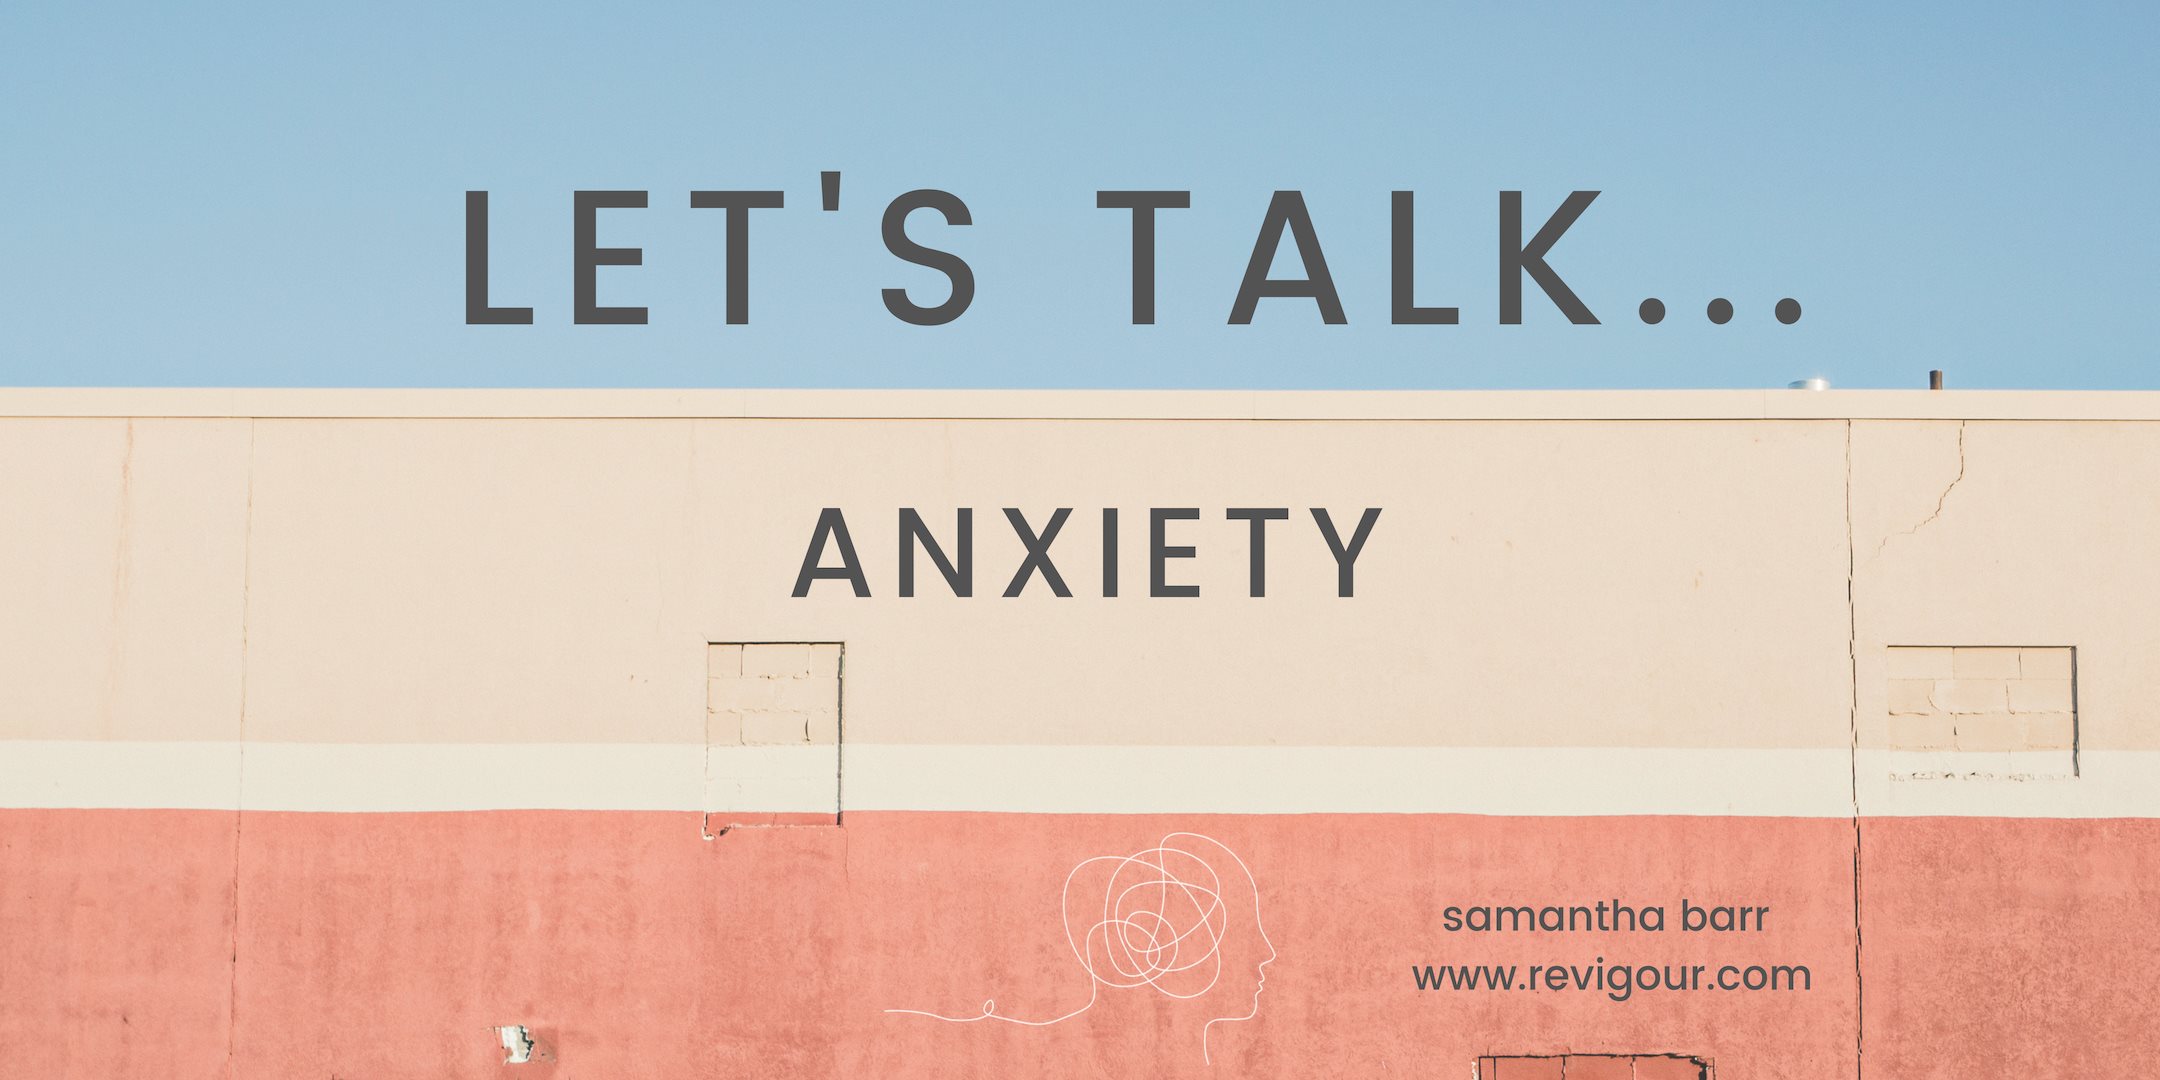 Lets talk. anxiety